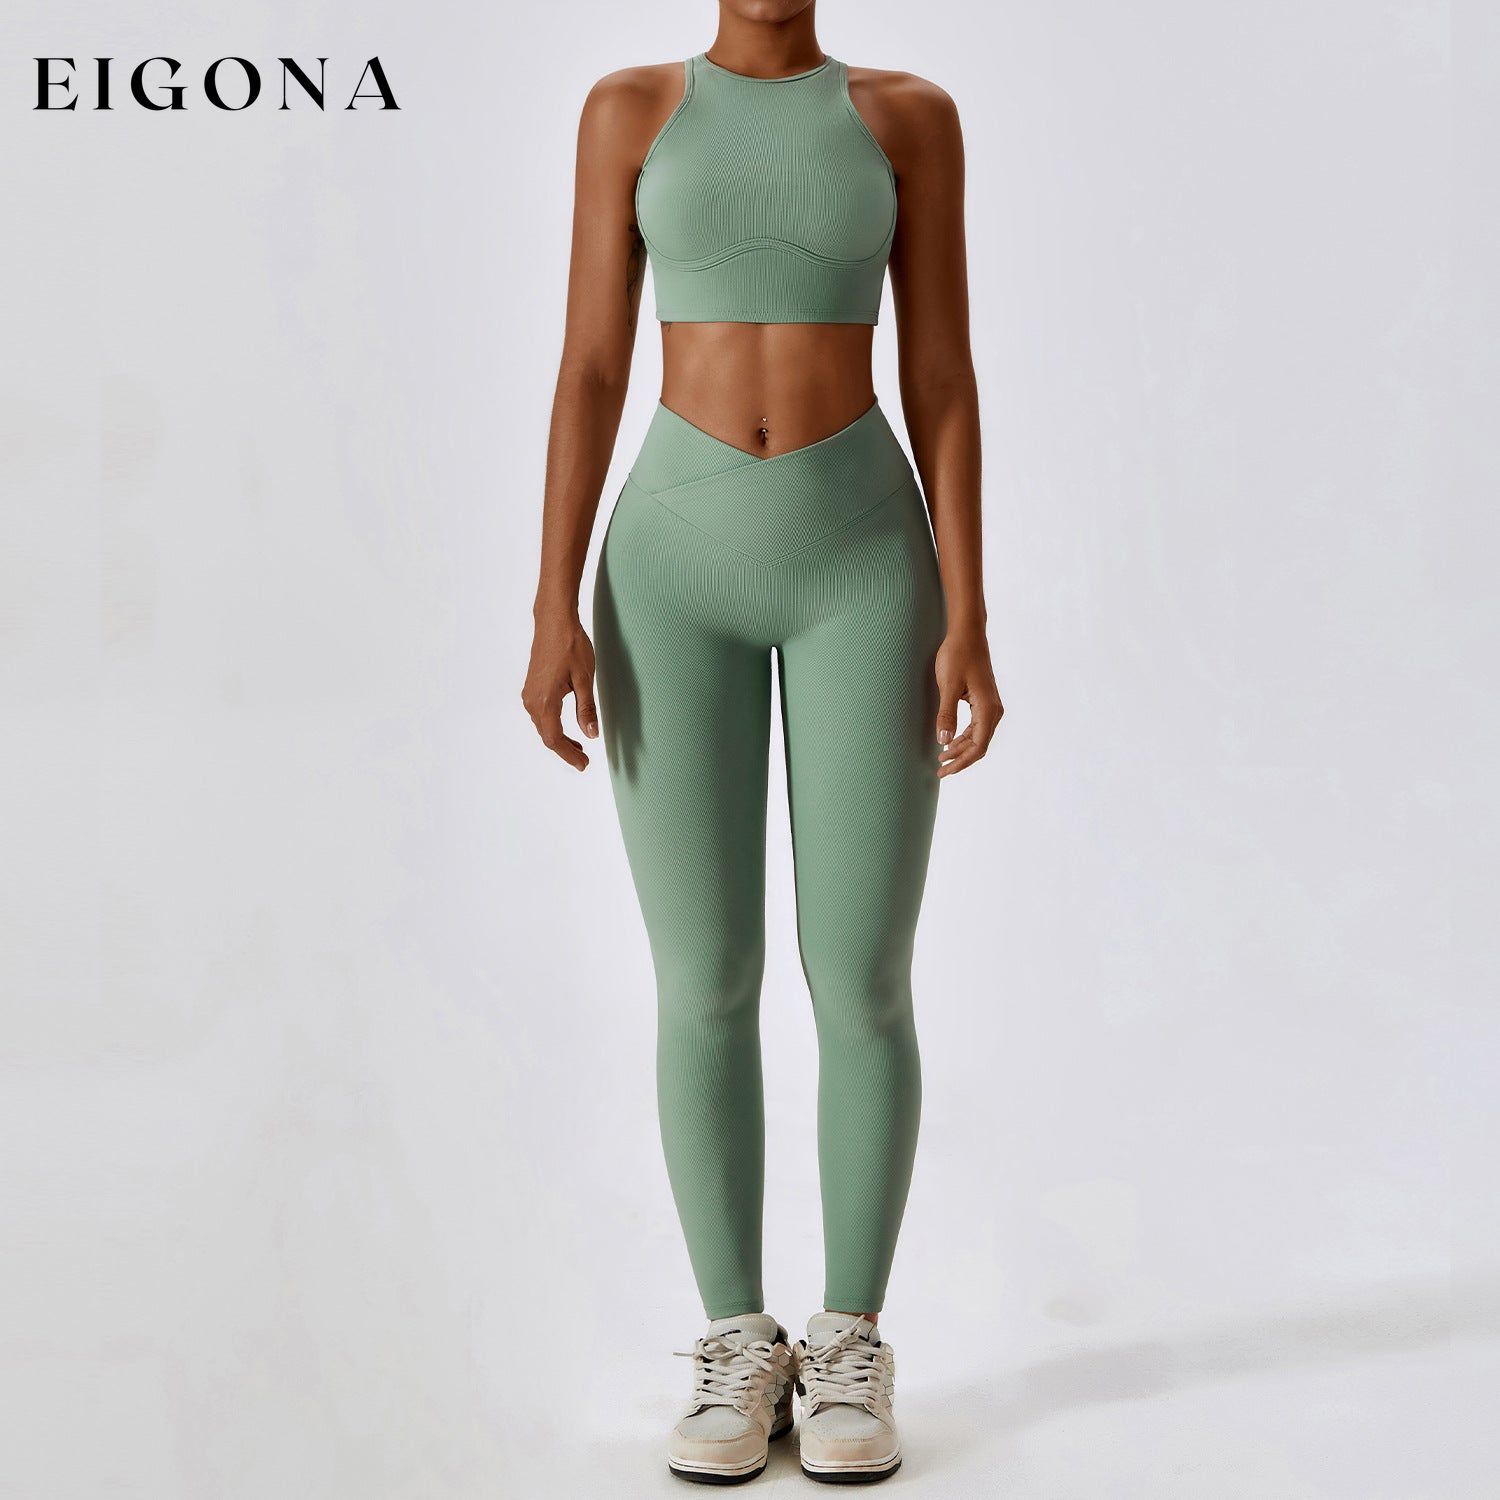 Thread Abdominal Shaping High Waist Beauty Back Yoga Suit Quick Drying Push up Hip Raise Skinny Workout Exercise Outfit -2 Bra Trousers Basil Green 2 piece activewear clothes set workout